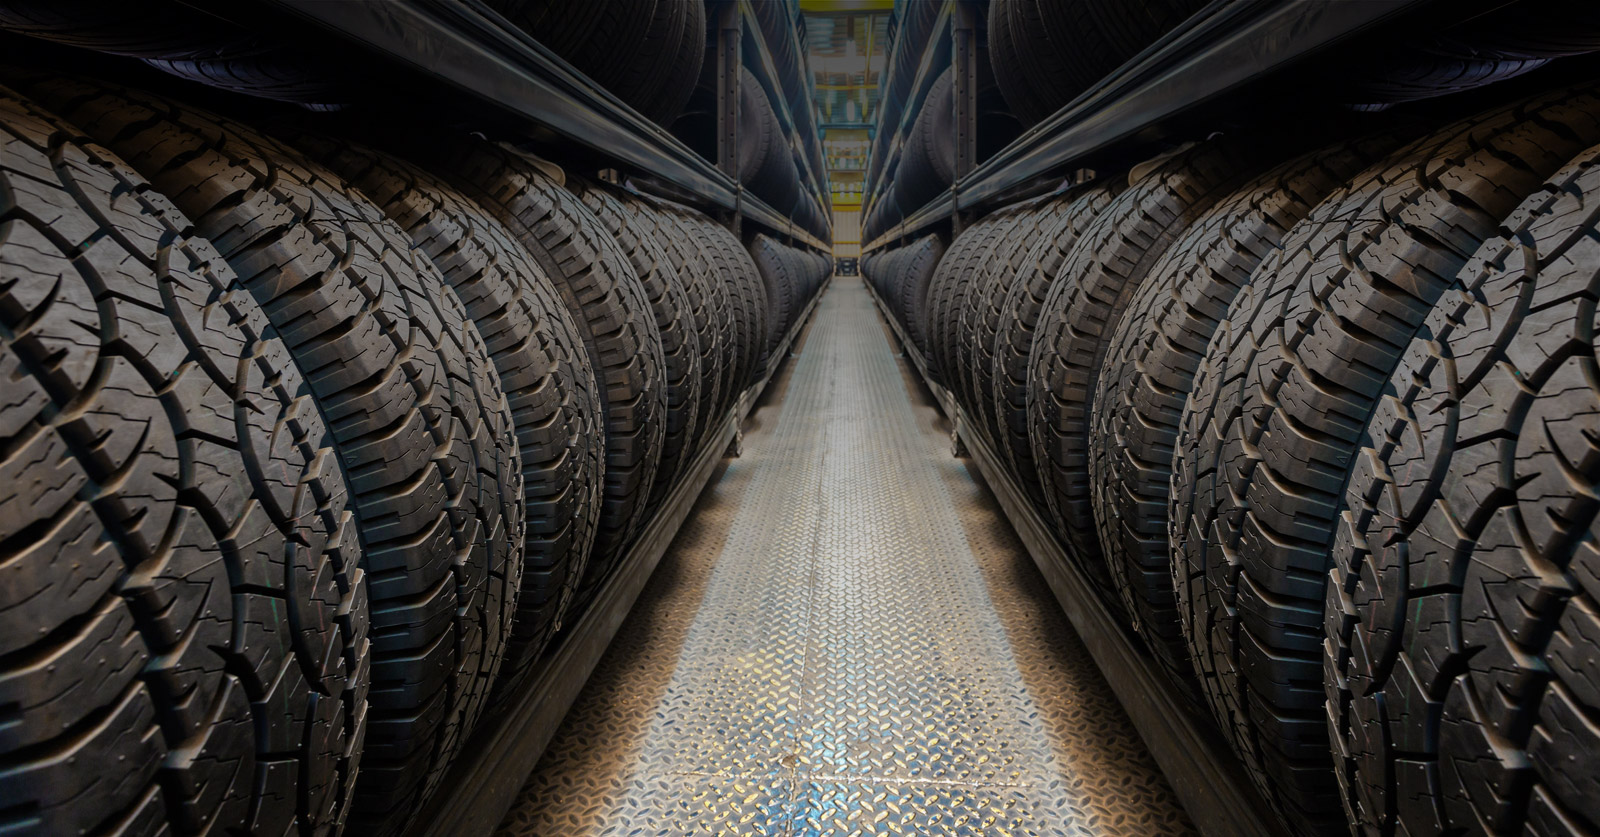 Photograph of tires in storage